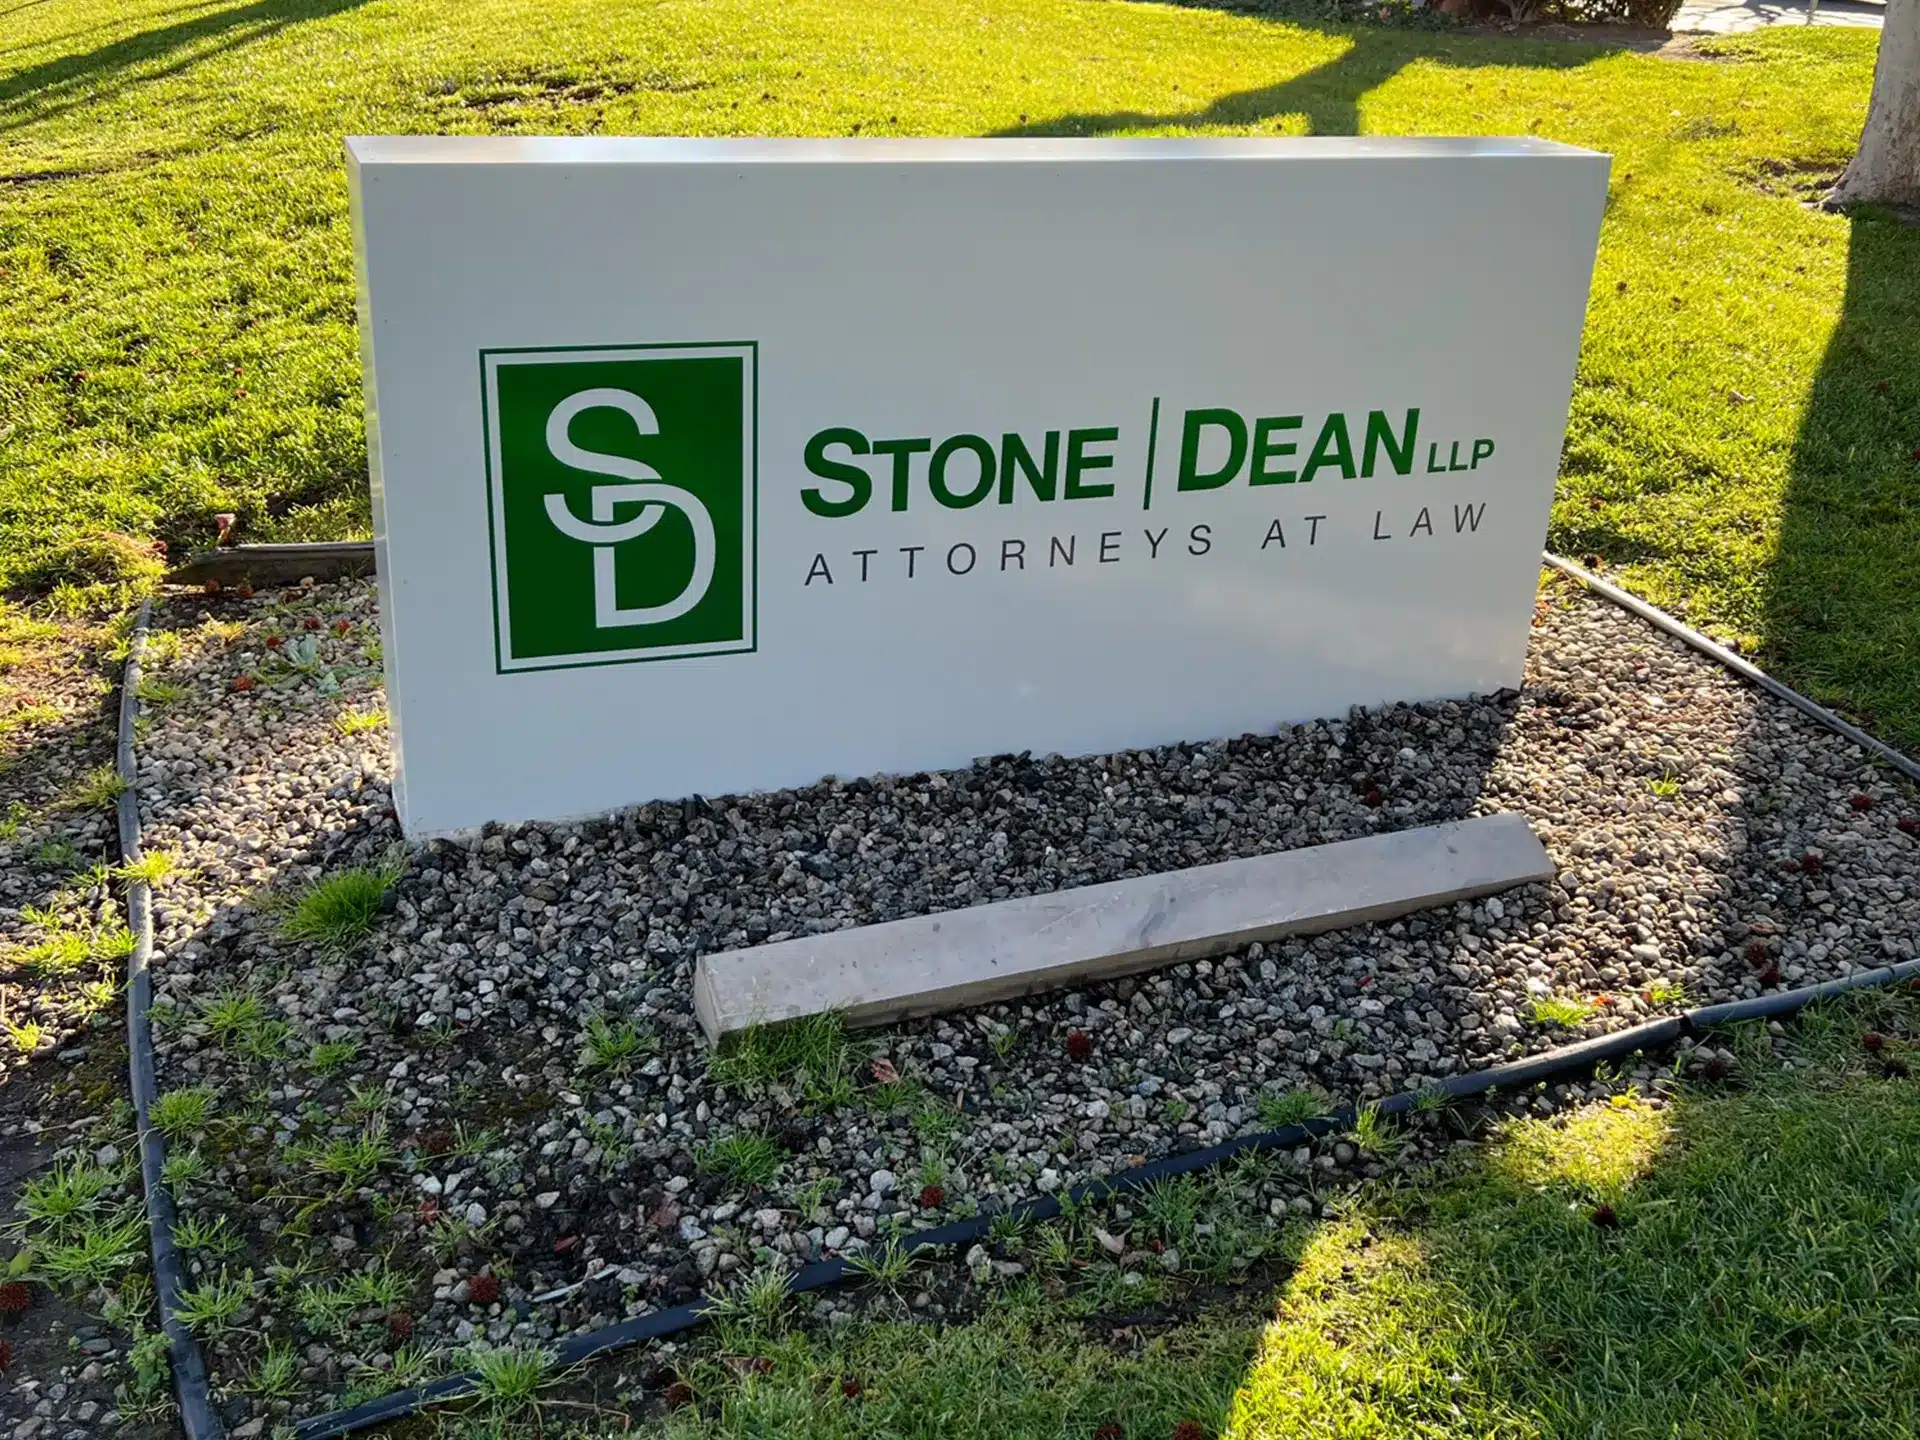 Stone | Dean Attorneys At Law